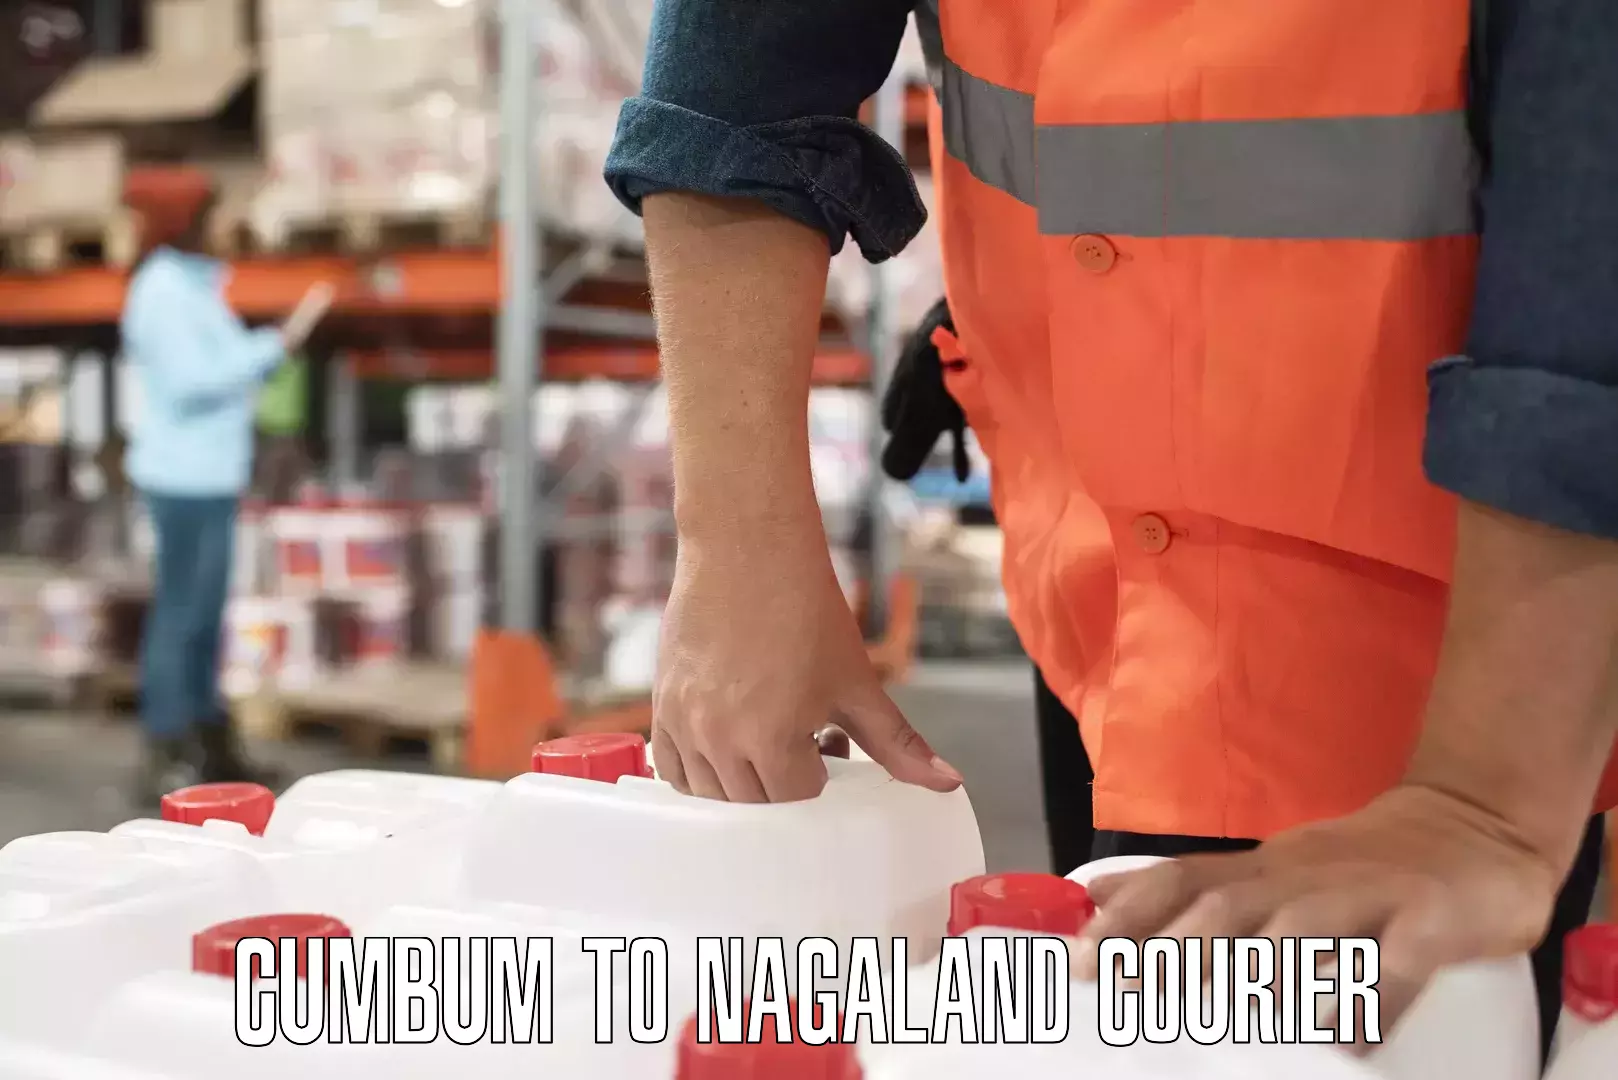 Multi-national courier services Cumbum to Nagaland